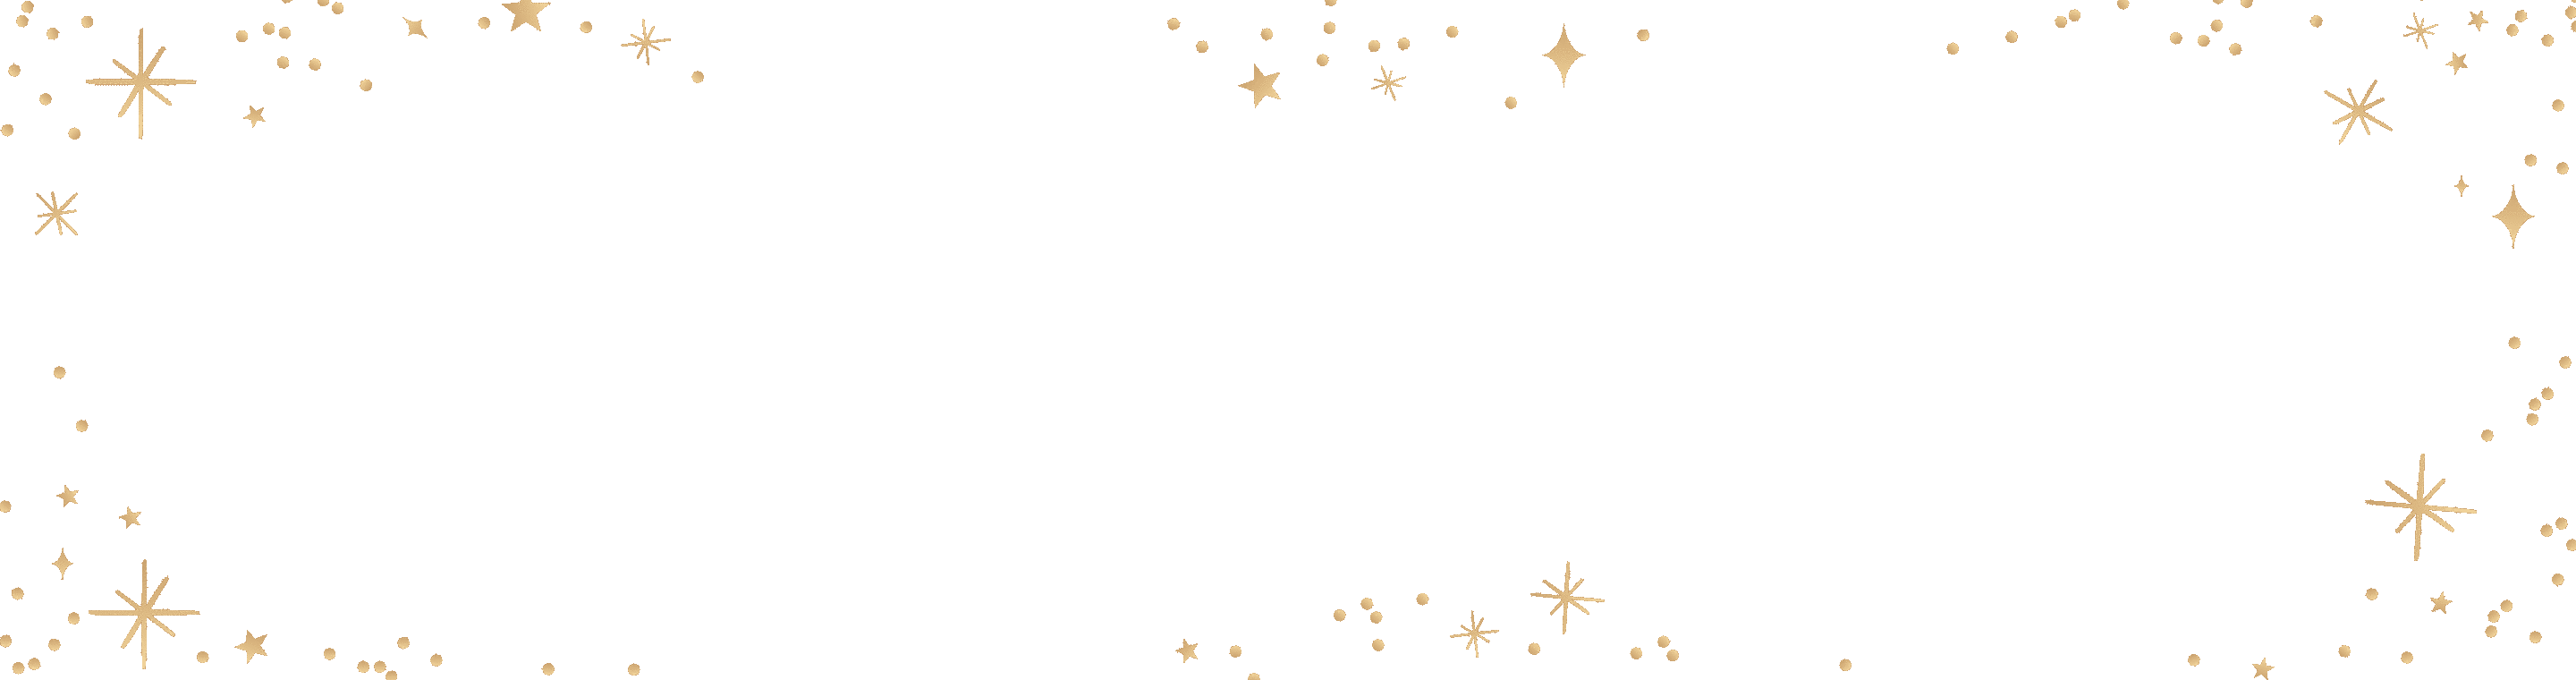 Starry Holiday background featuring animated stars and an illustration of wrapped gifts.